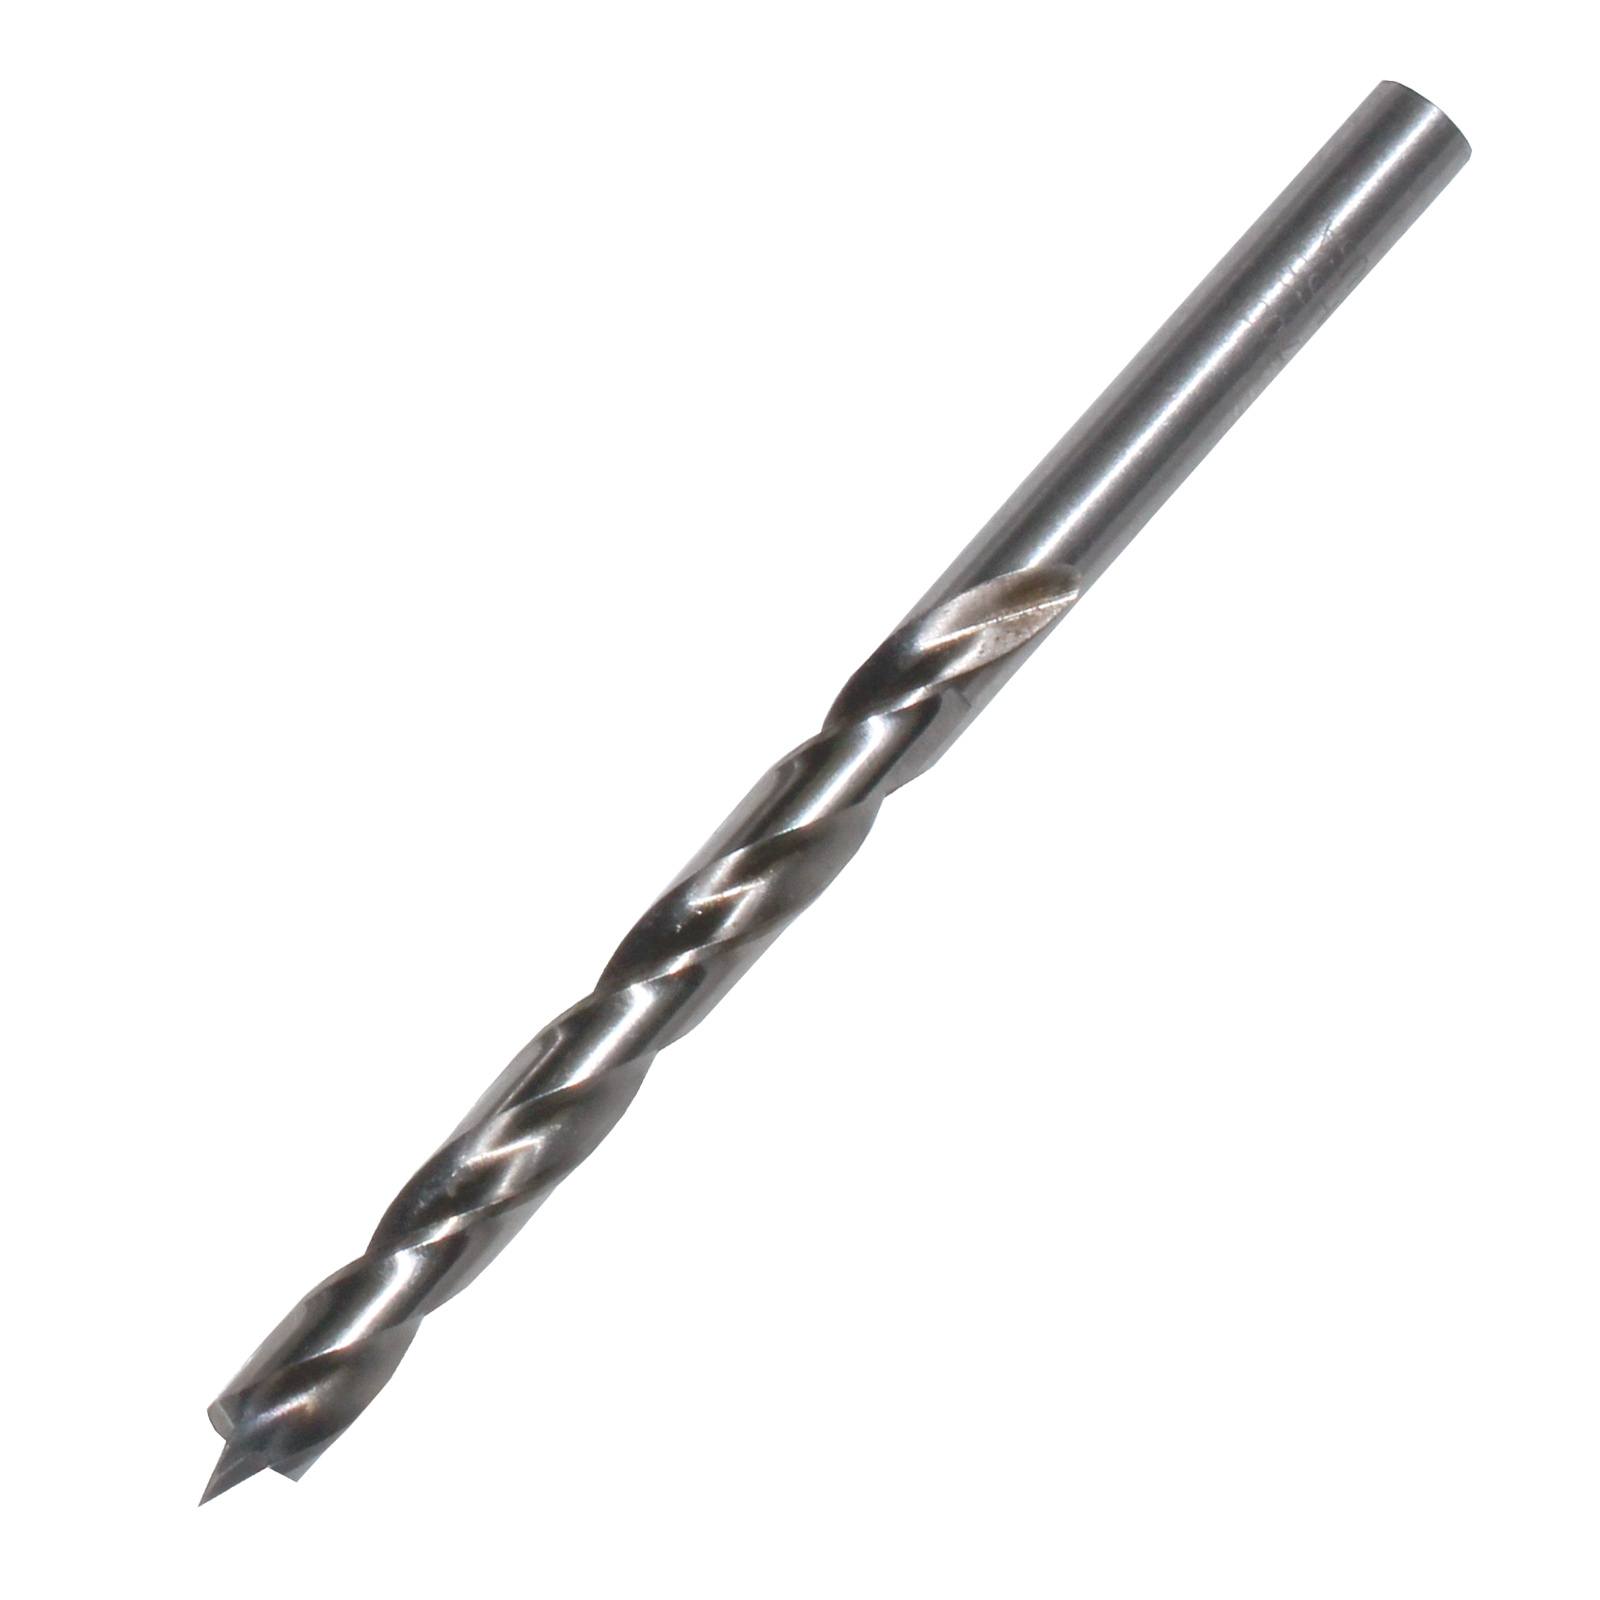 Aexit Metal Right Drill Bits Hand Brad Point Boring Drill Bit 8mm Cutting Dia Auger Drill Bits 70mm Long 